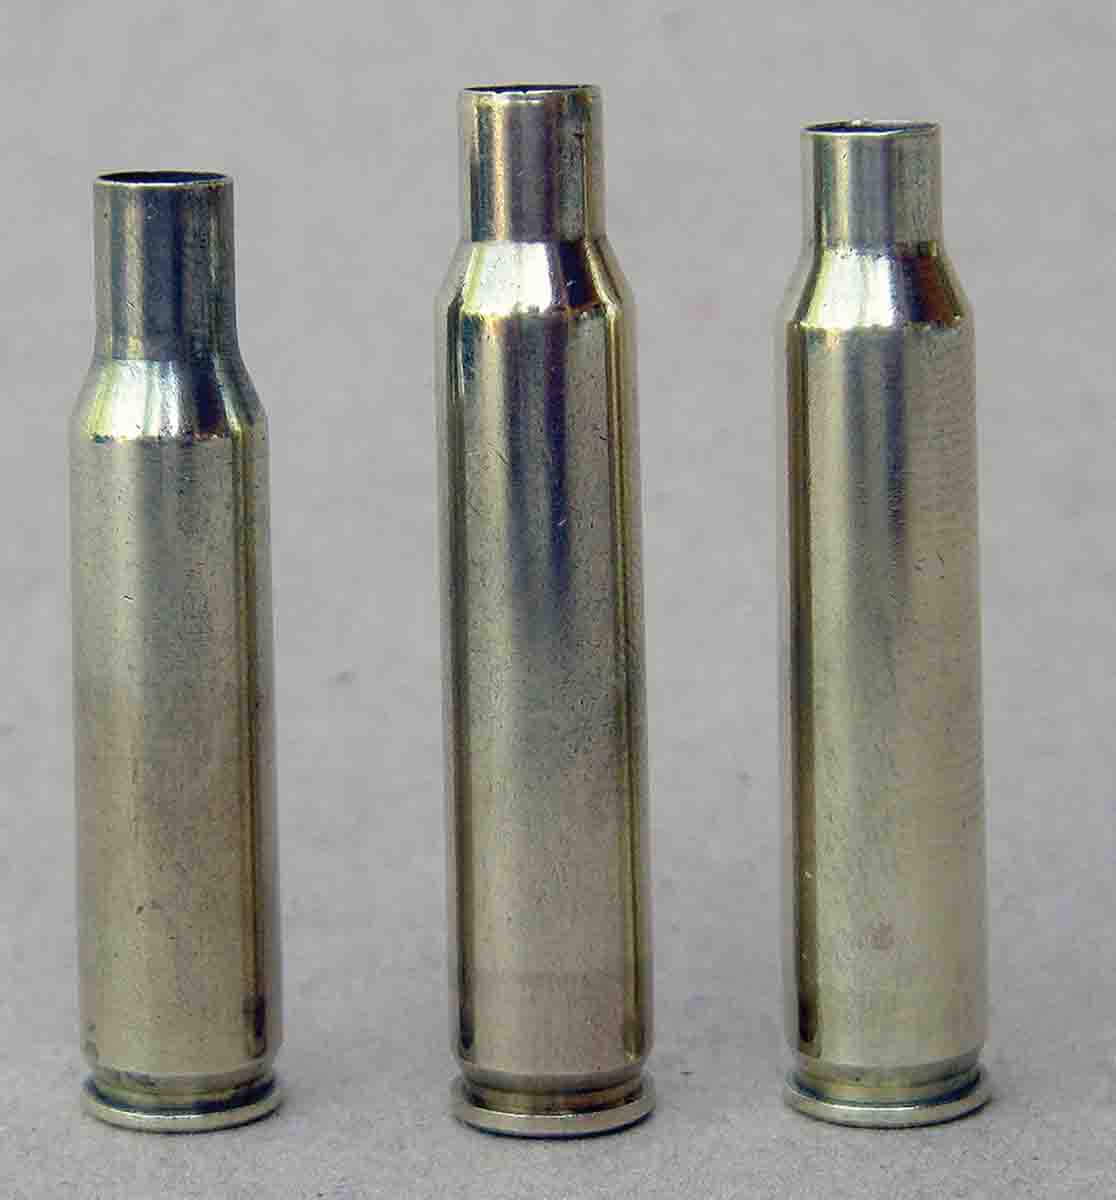 The .223 Remington (right) was based on the .222 Remington case (left). Its performance approached the .222 Remington Magnum (center) introduced in 1957.